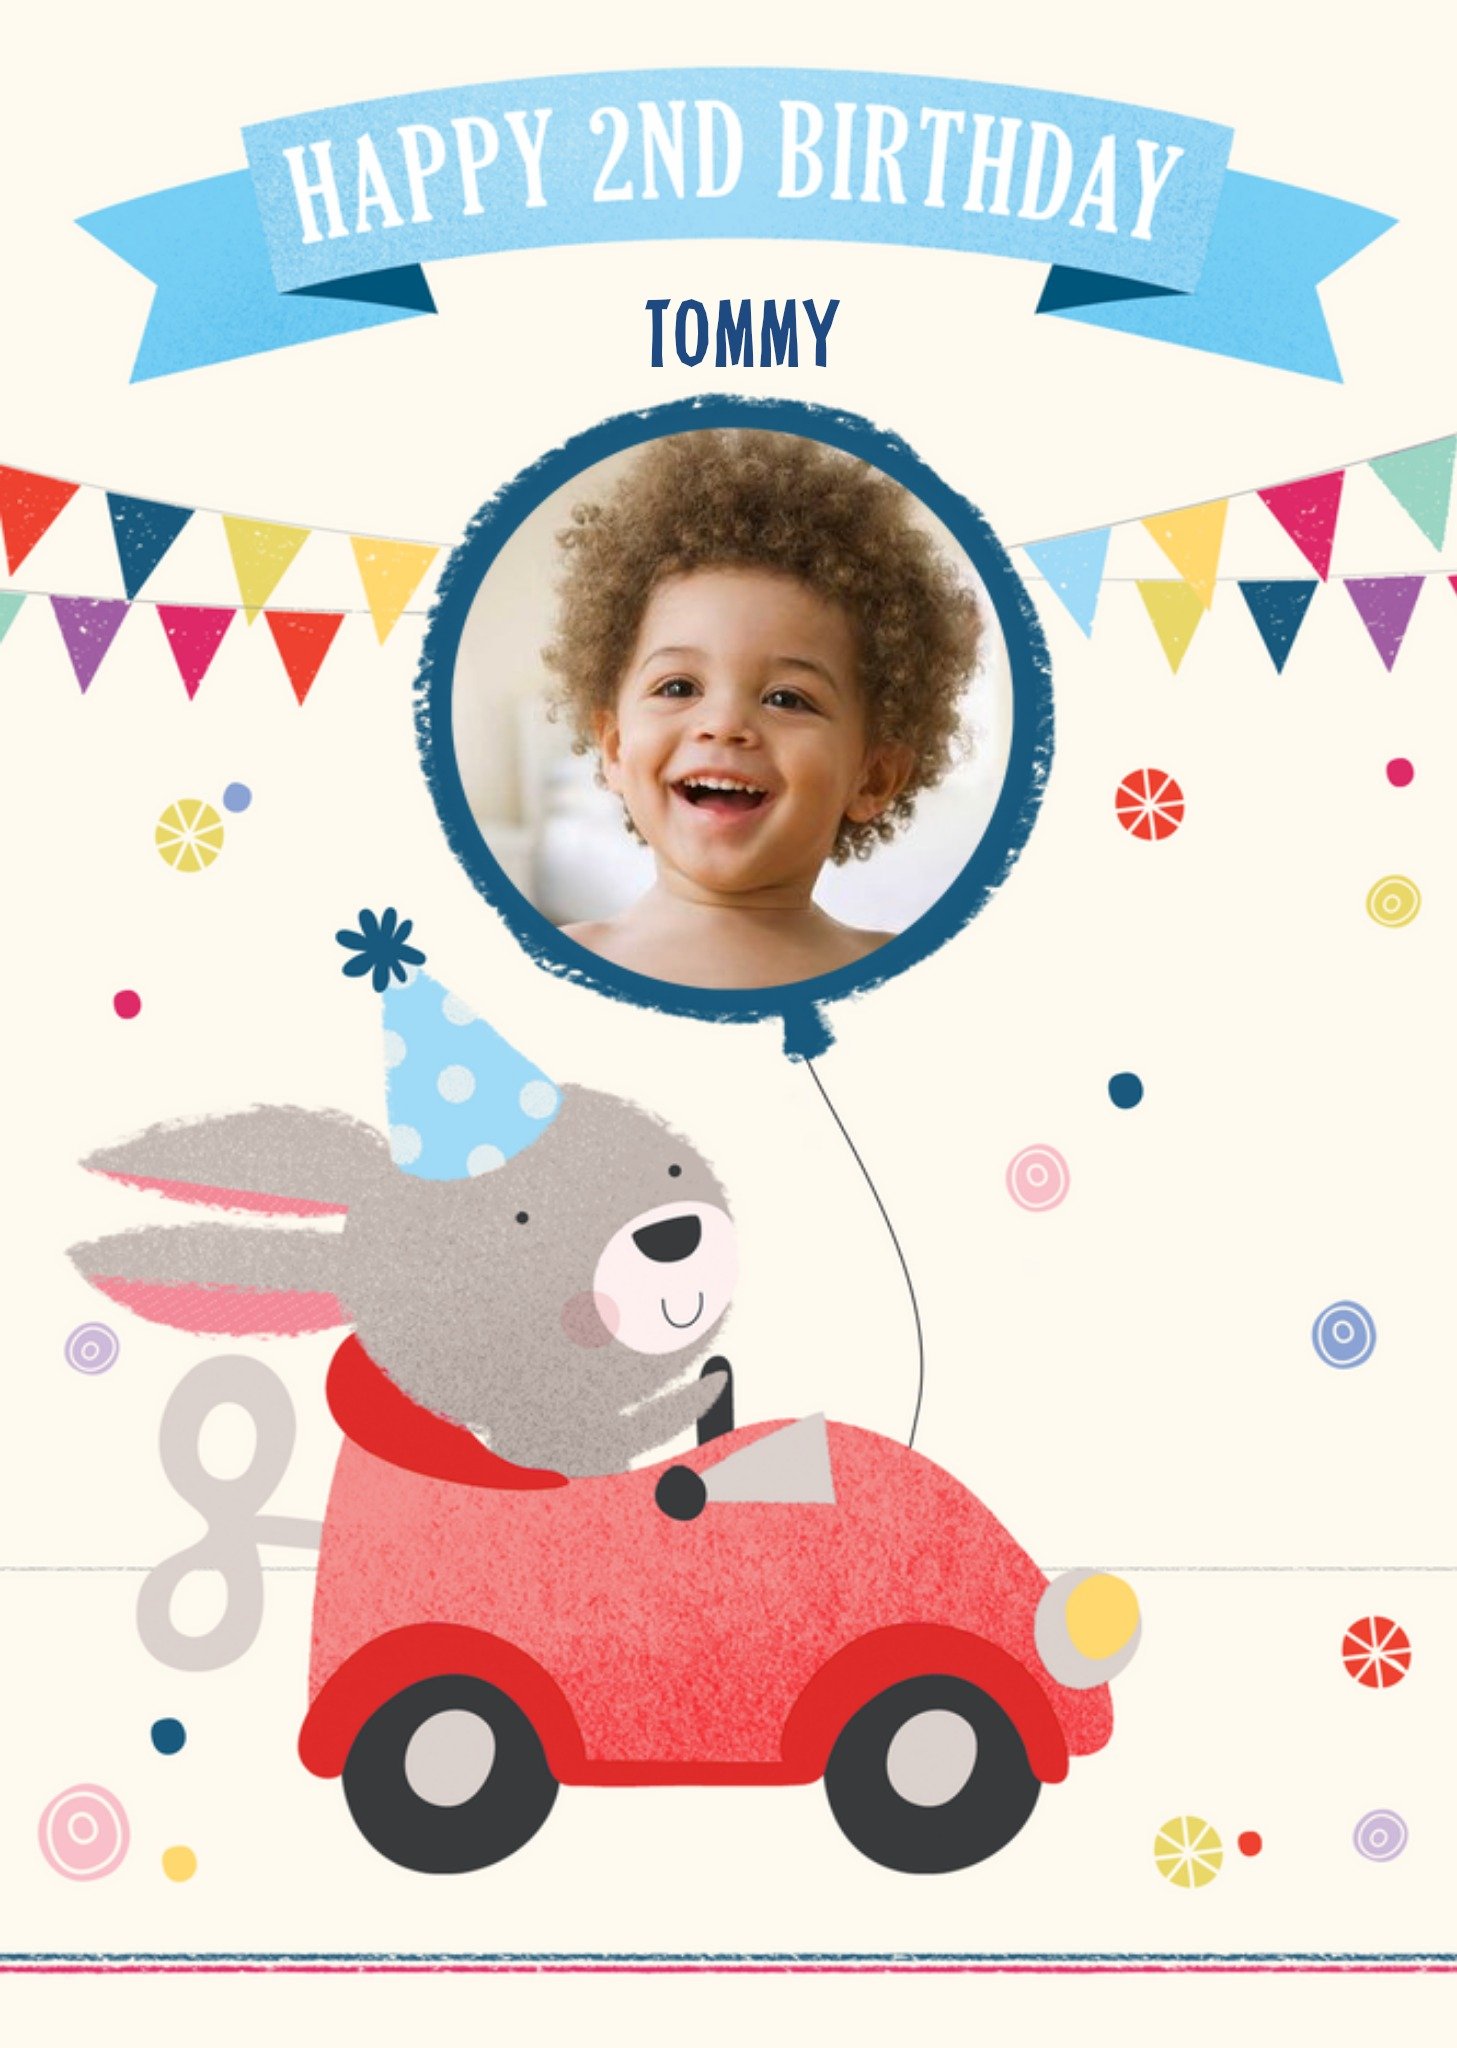 Moonpig Illustration Of A Rabbit In A Car With A Photo Frame Balloon Second Birthday Photo Upload Ca